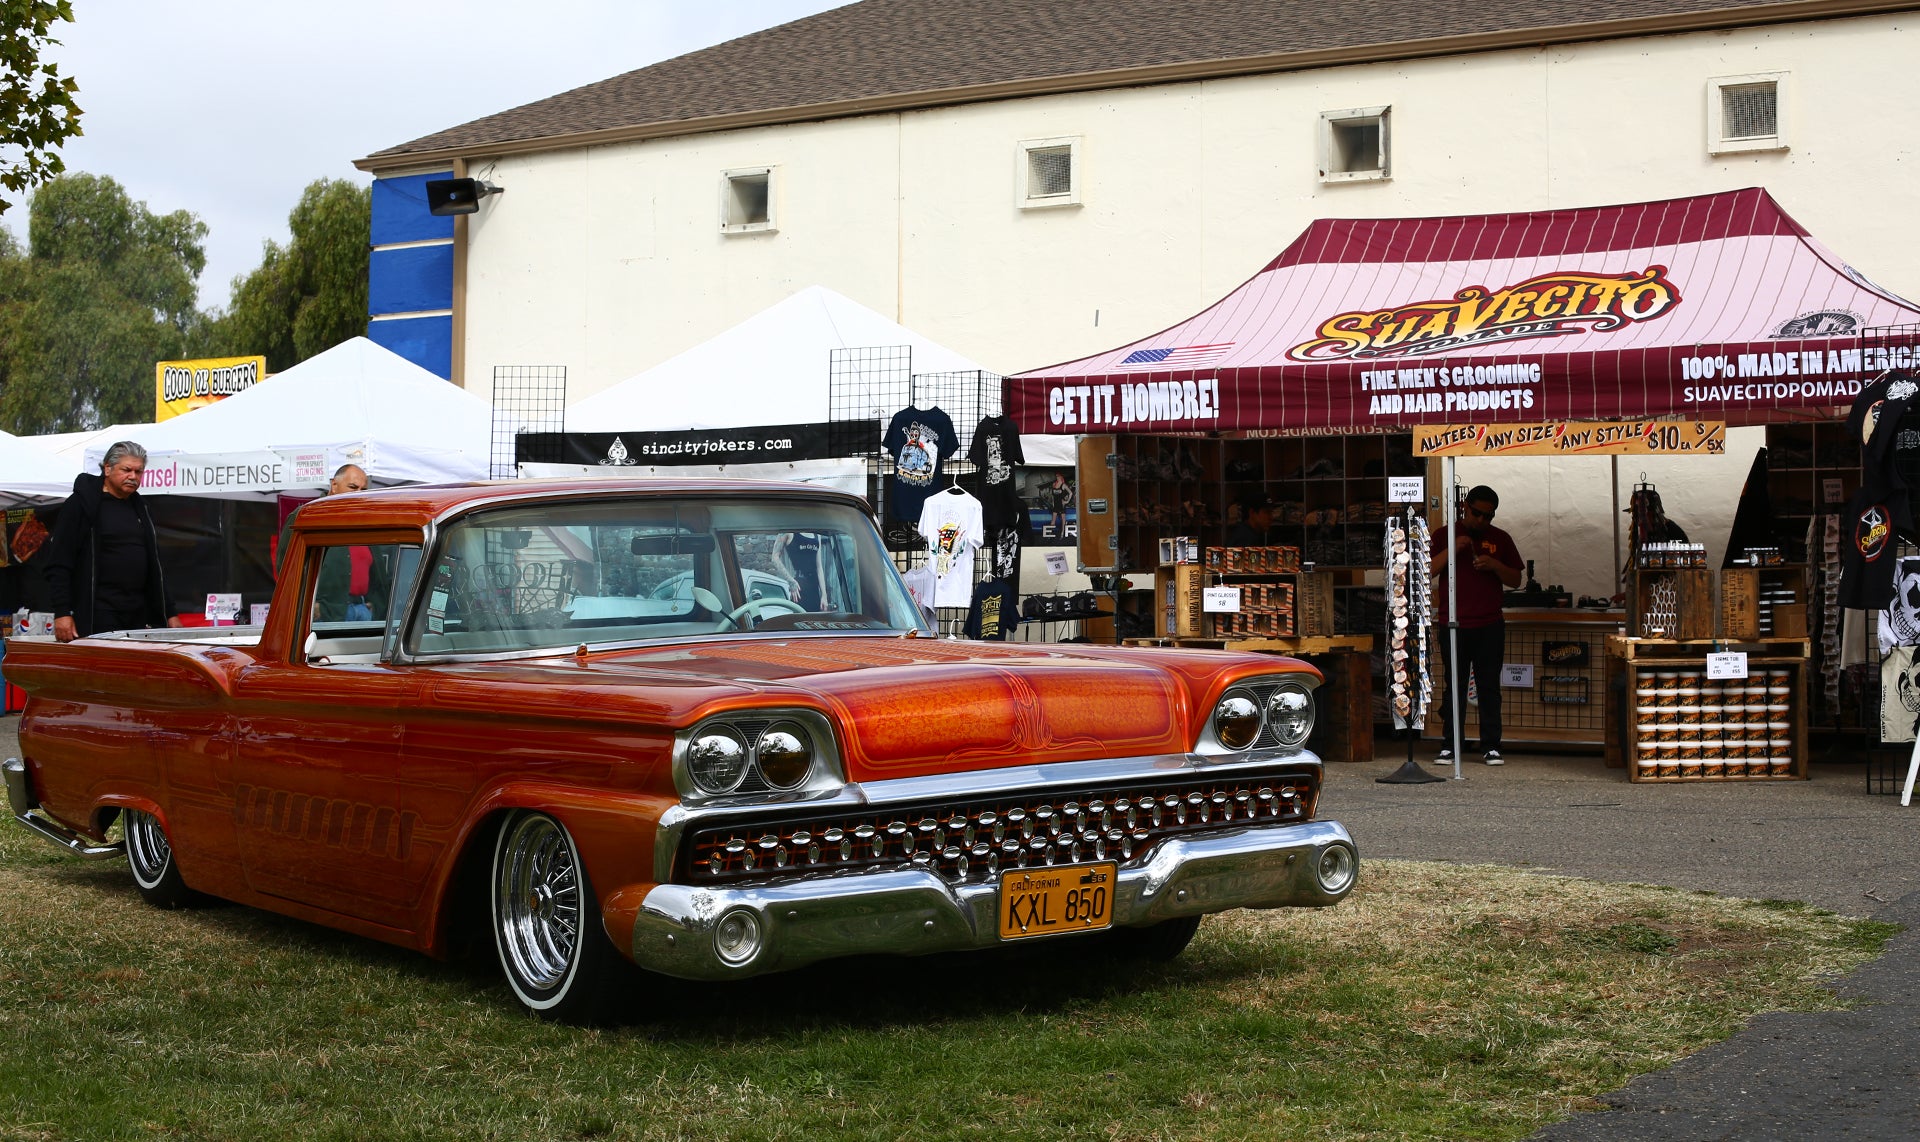 1959 Ford Ranchero Posted in front of the Suavecito Pomade Booth